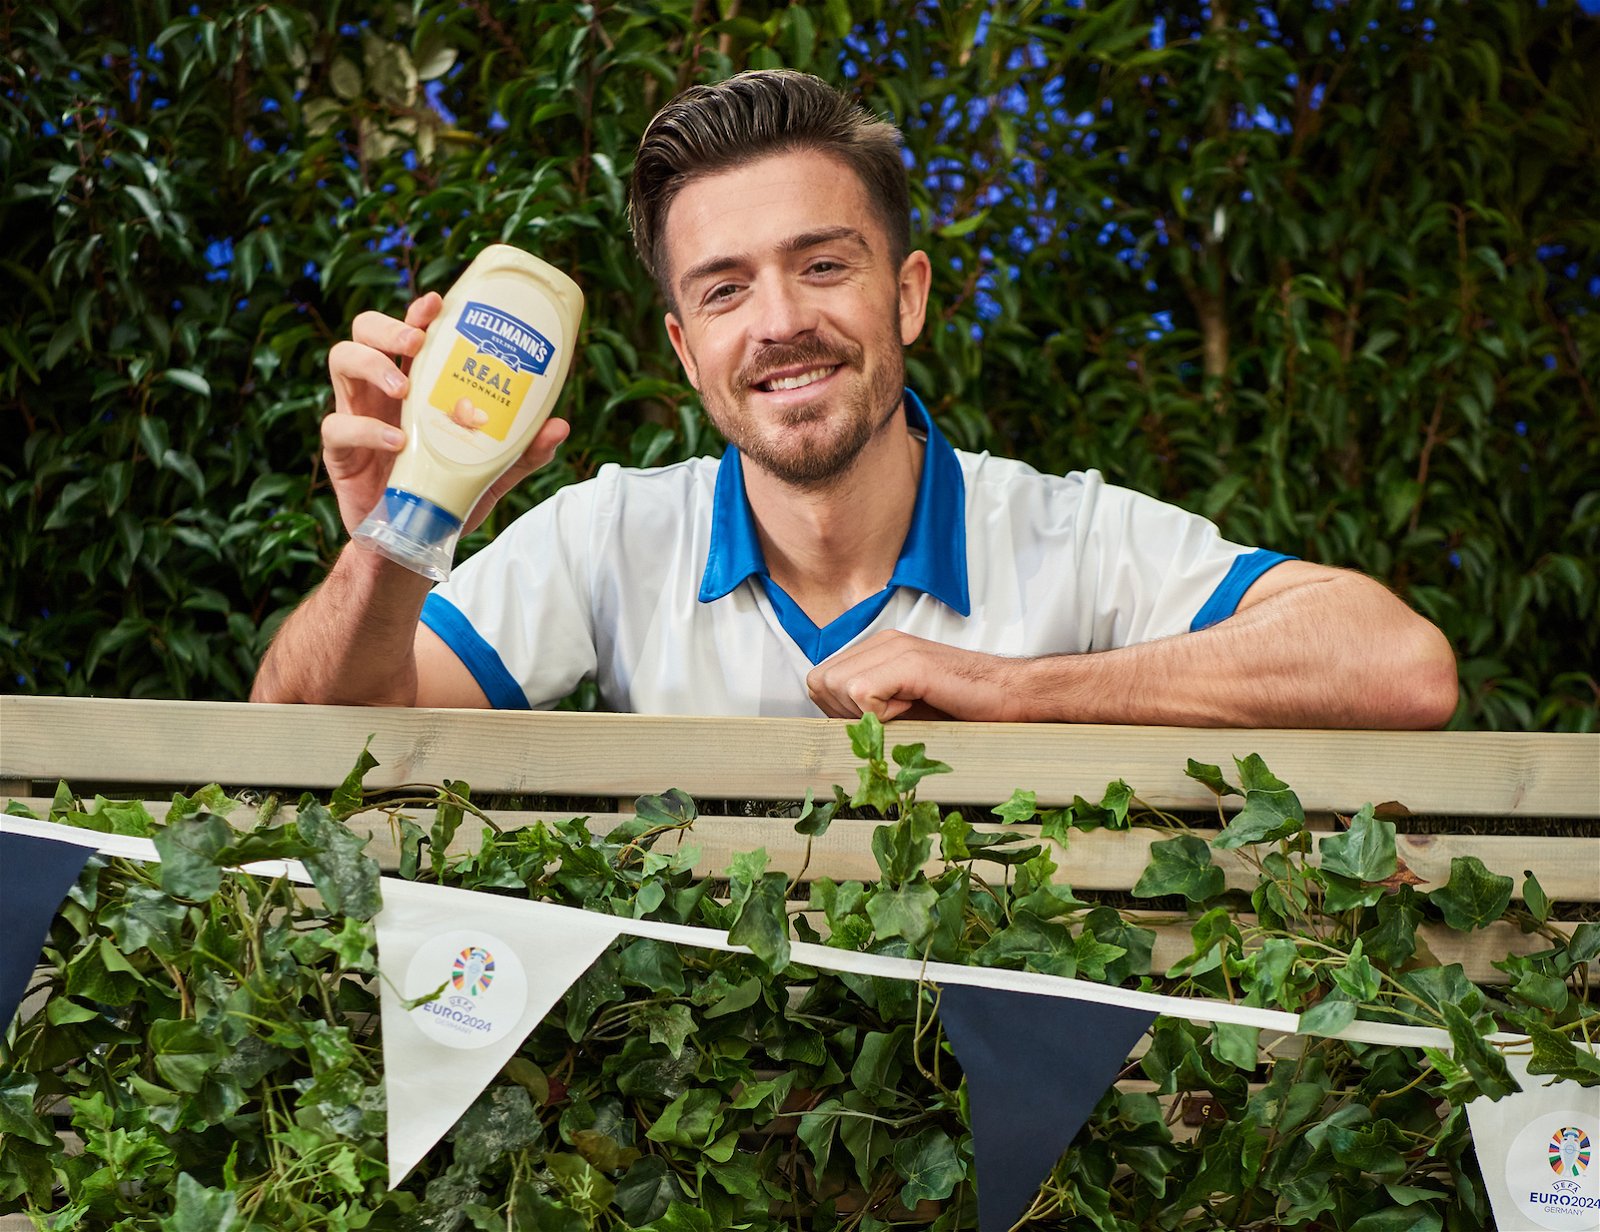 Manchester City star Jack Grealish teams up with Hellmann’s for the reveal of the official ‘Grealish Burger’ recipe